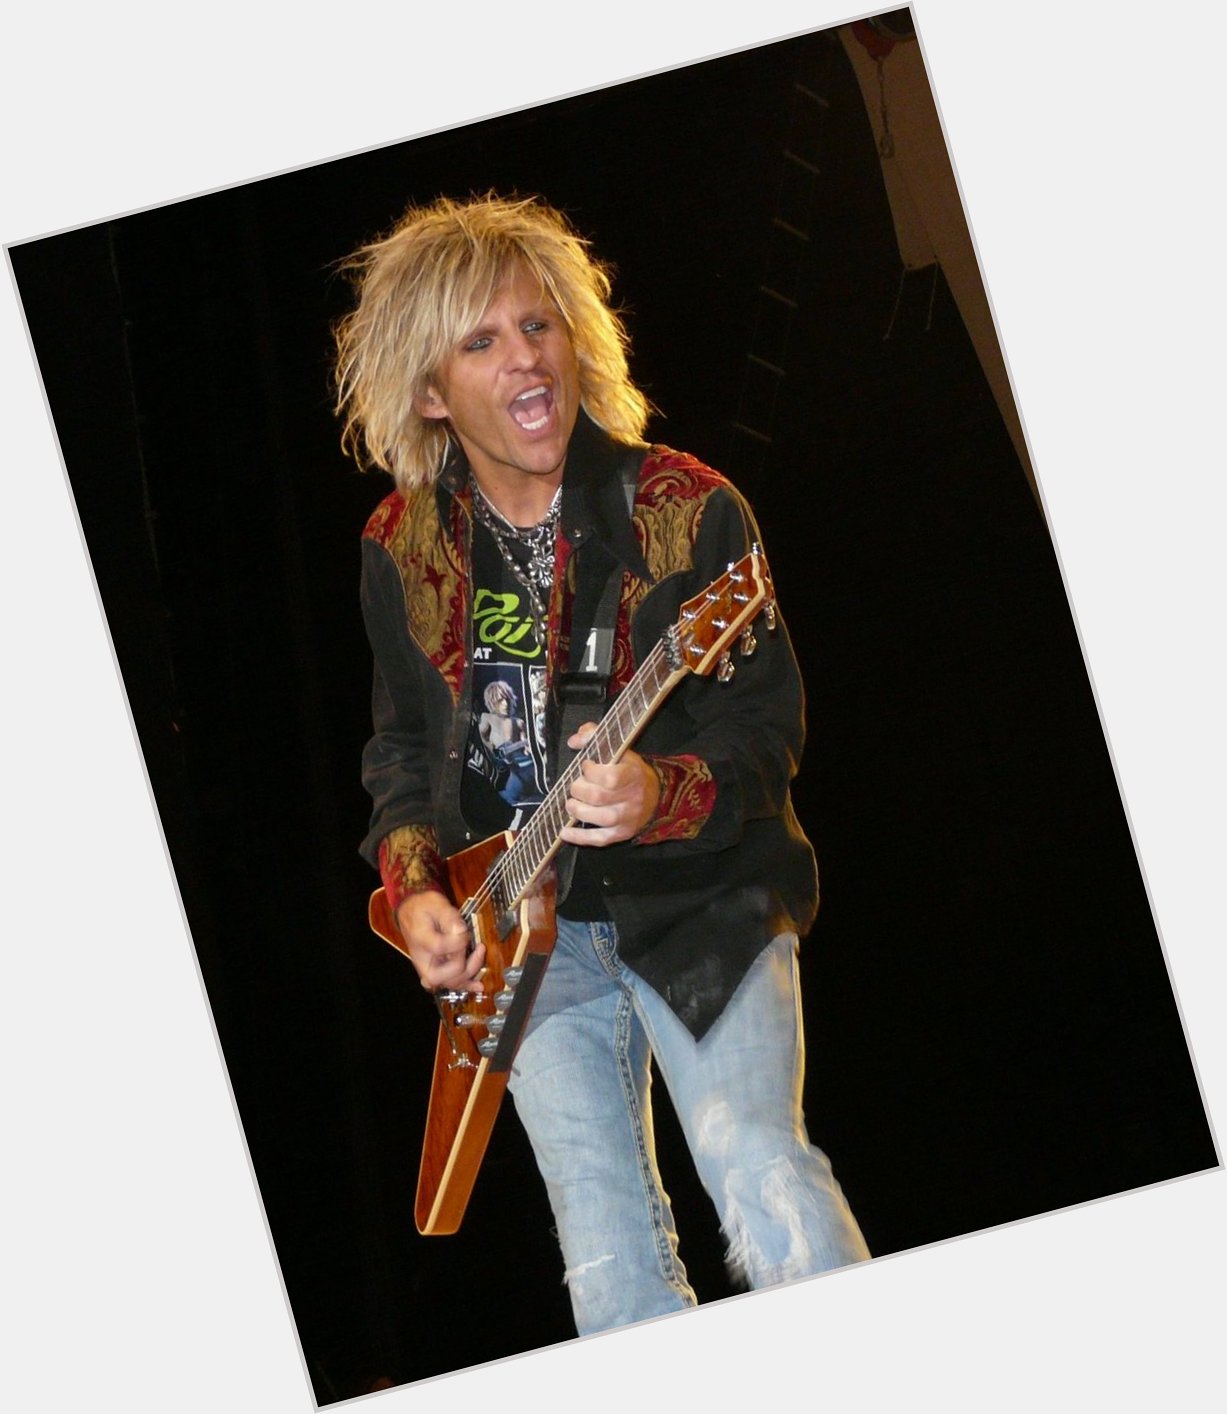 Happy Birthday to   C.C. DeVille   - What is your favorite Poison song?
 